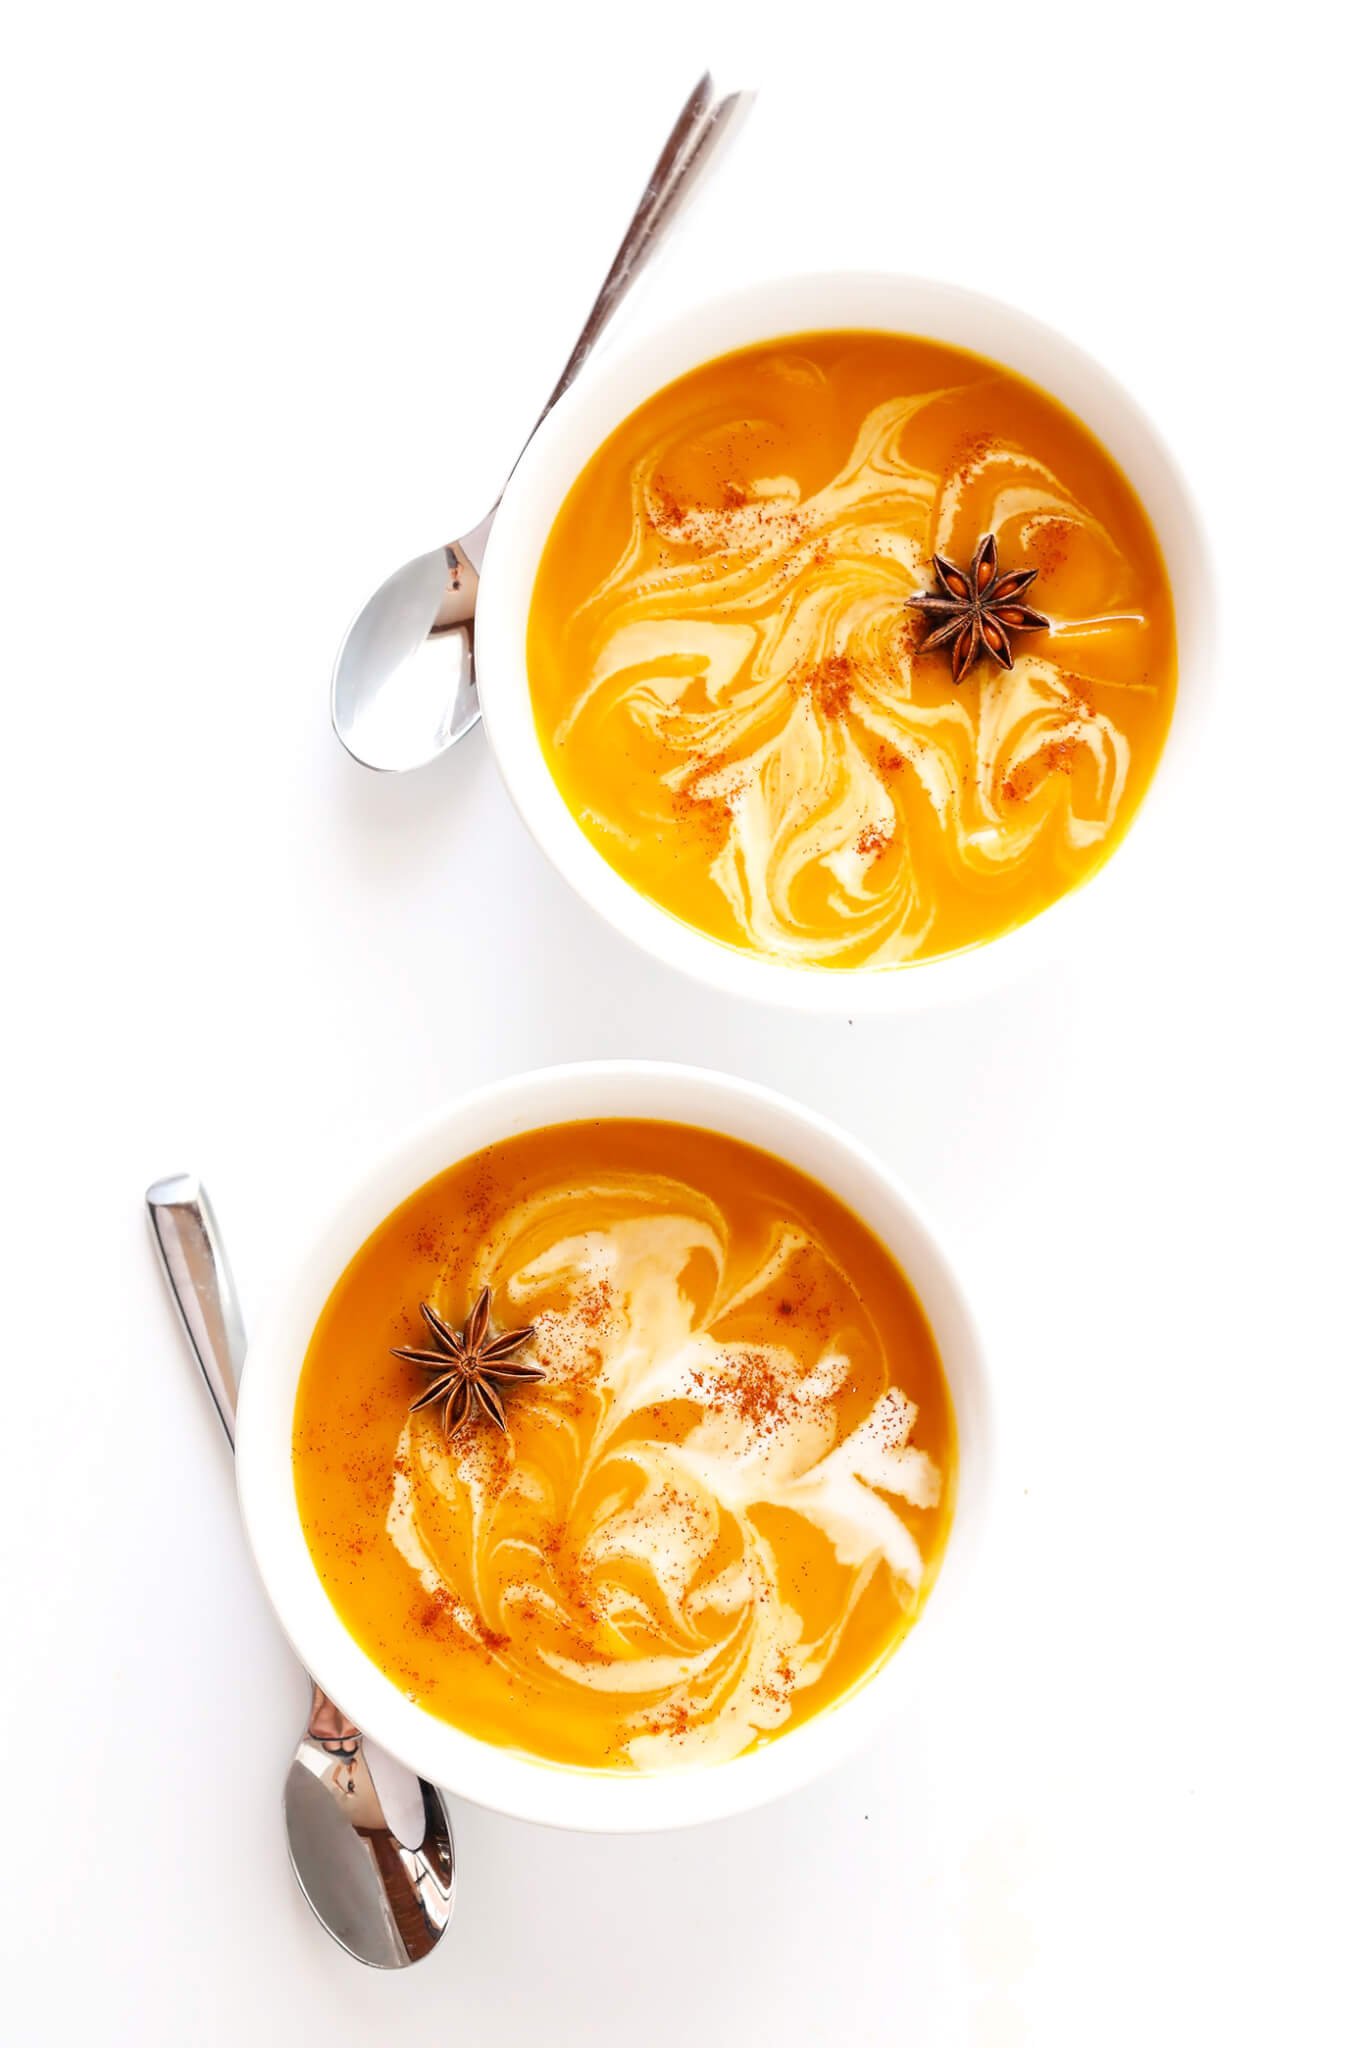 This Chai Butternut Squash Soup recipe is easy to make, naturally gluten-free and vegan, and seasoned simply and deliciously with a simple chai tea bag. My kind of fall comfort food.